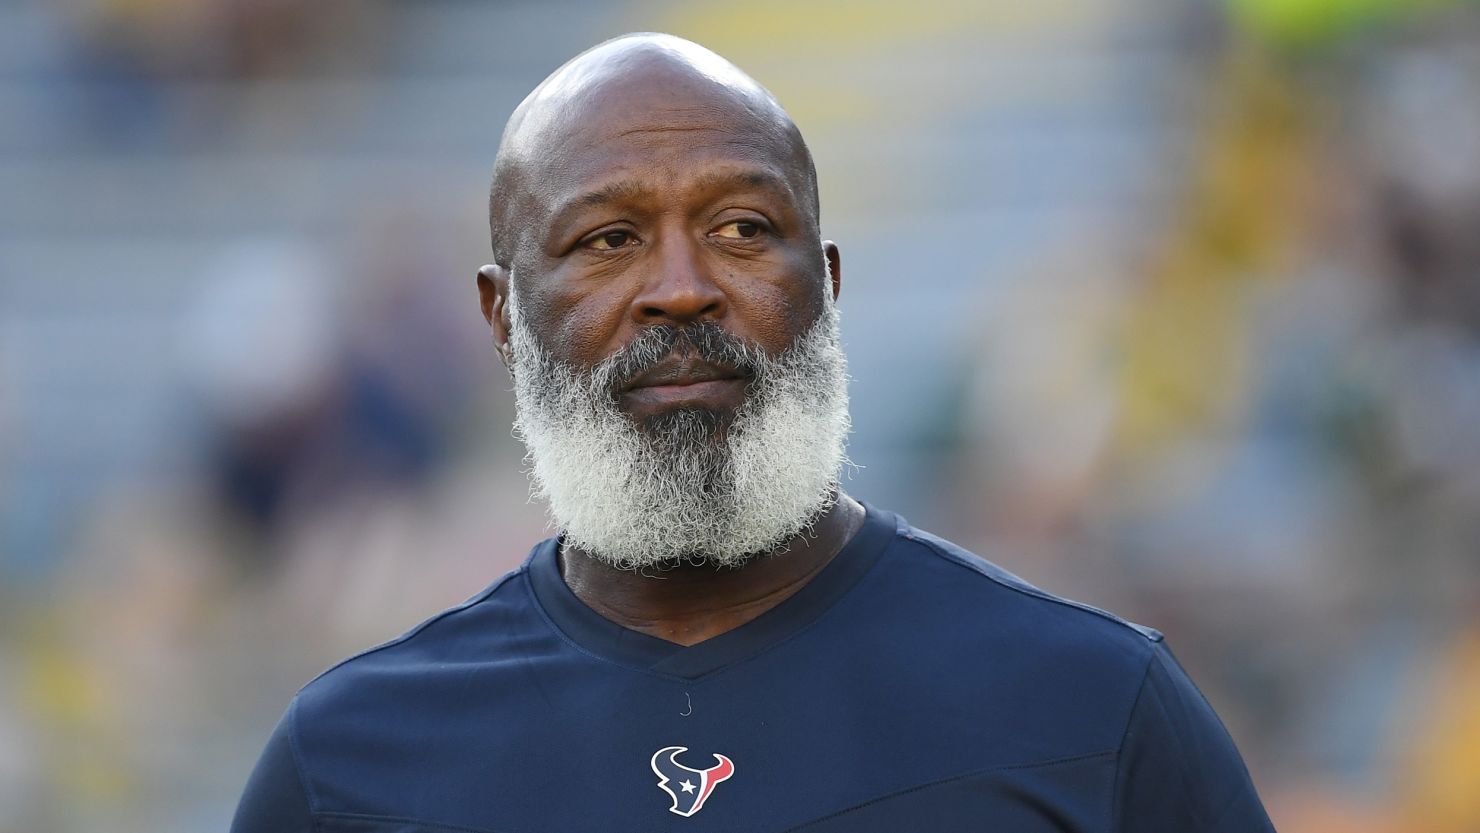 Lovie Smith, who was associate head coach and defensive coordinator for the Houston Texans last season, has been hired as the team's new head coach.